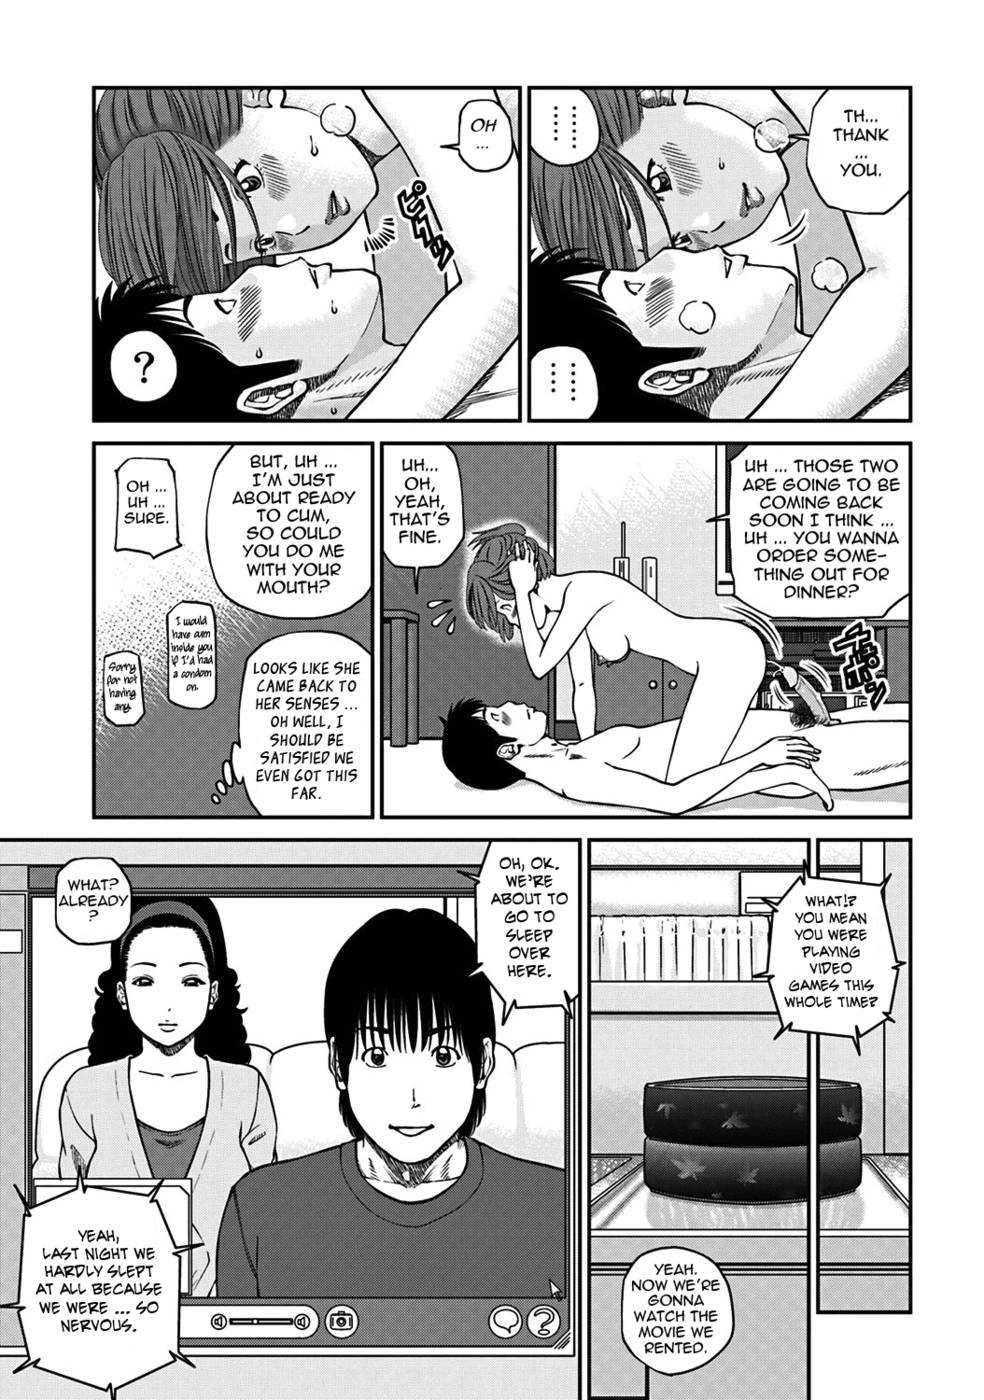 Hentai Manga Comic-33 Year Old Unsatisfied Wife-Chapter 4-Spouse Swapping-Final Day-5